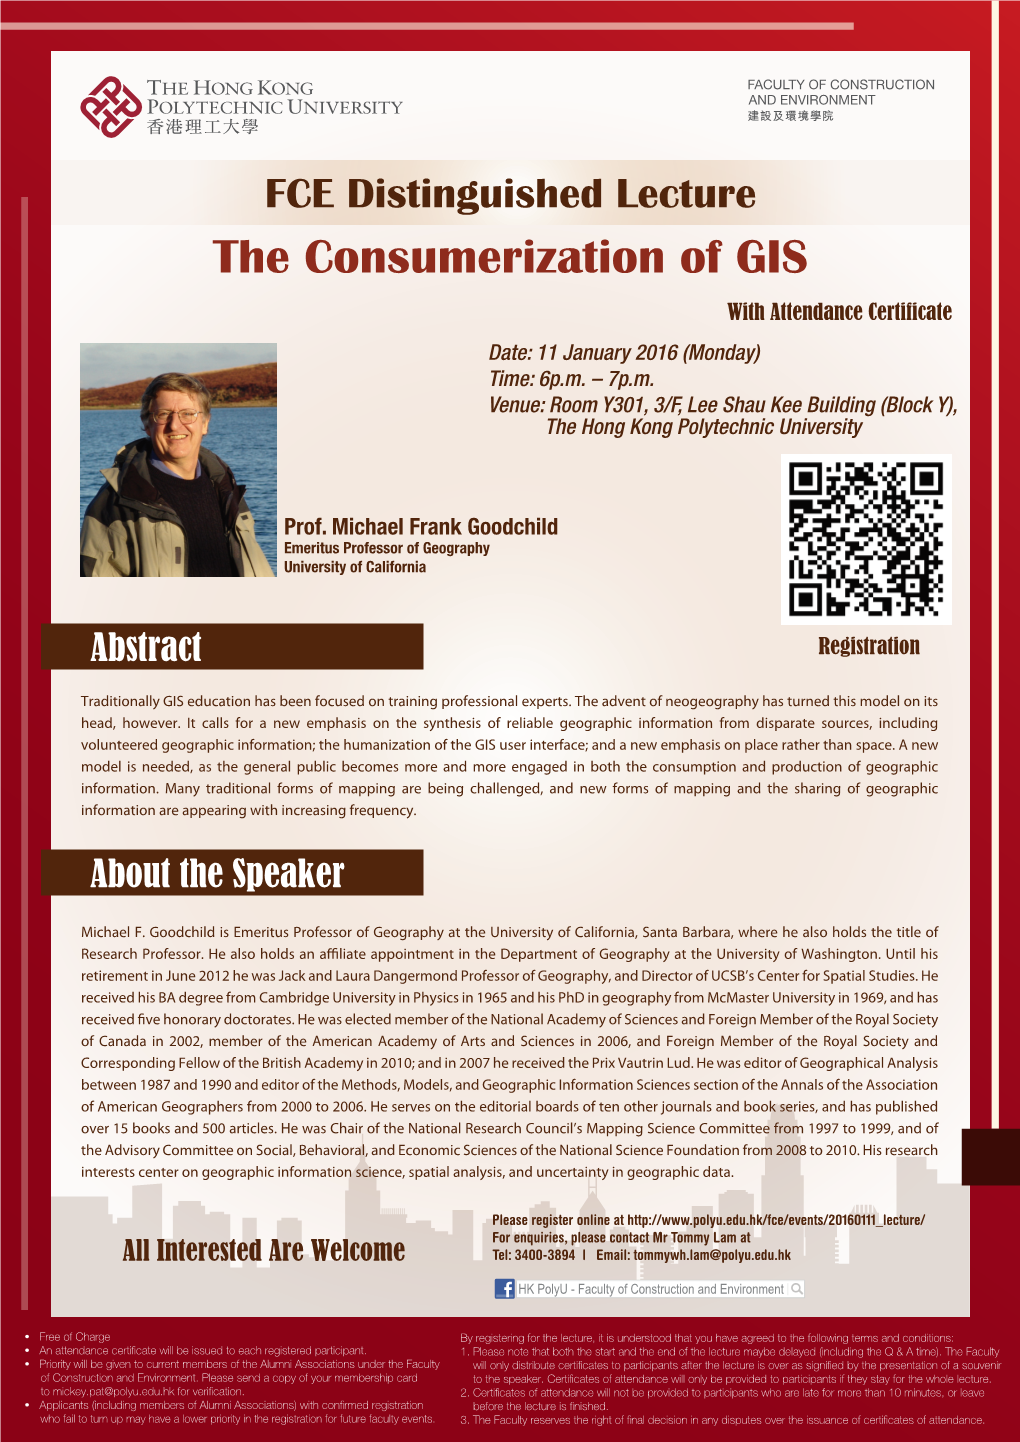 The Consumerization of GIS with Attendance Certificate Date: 11 January 2016 (Monday) Time: 6P.M